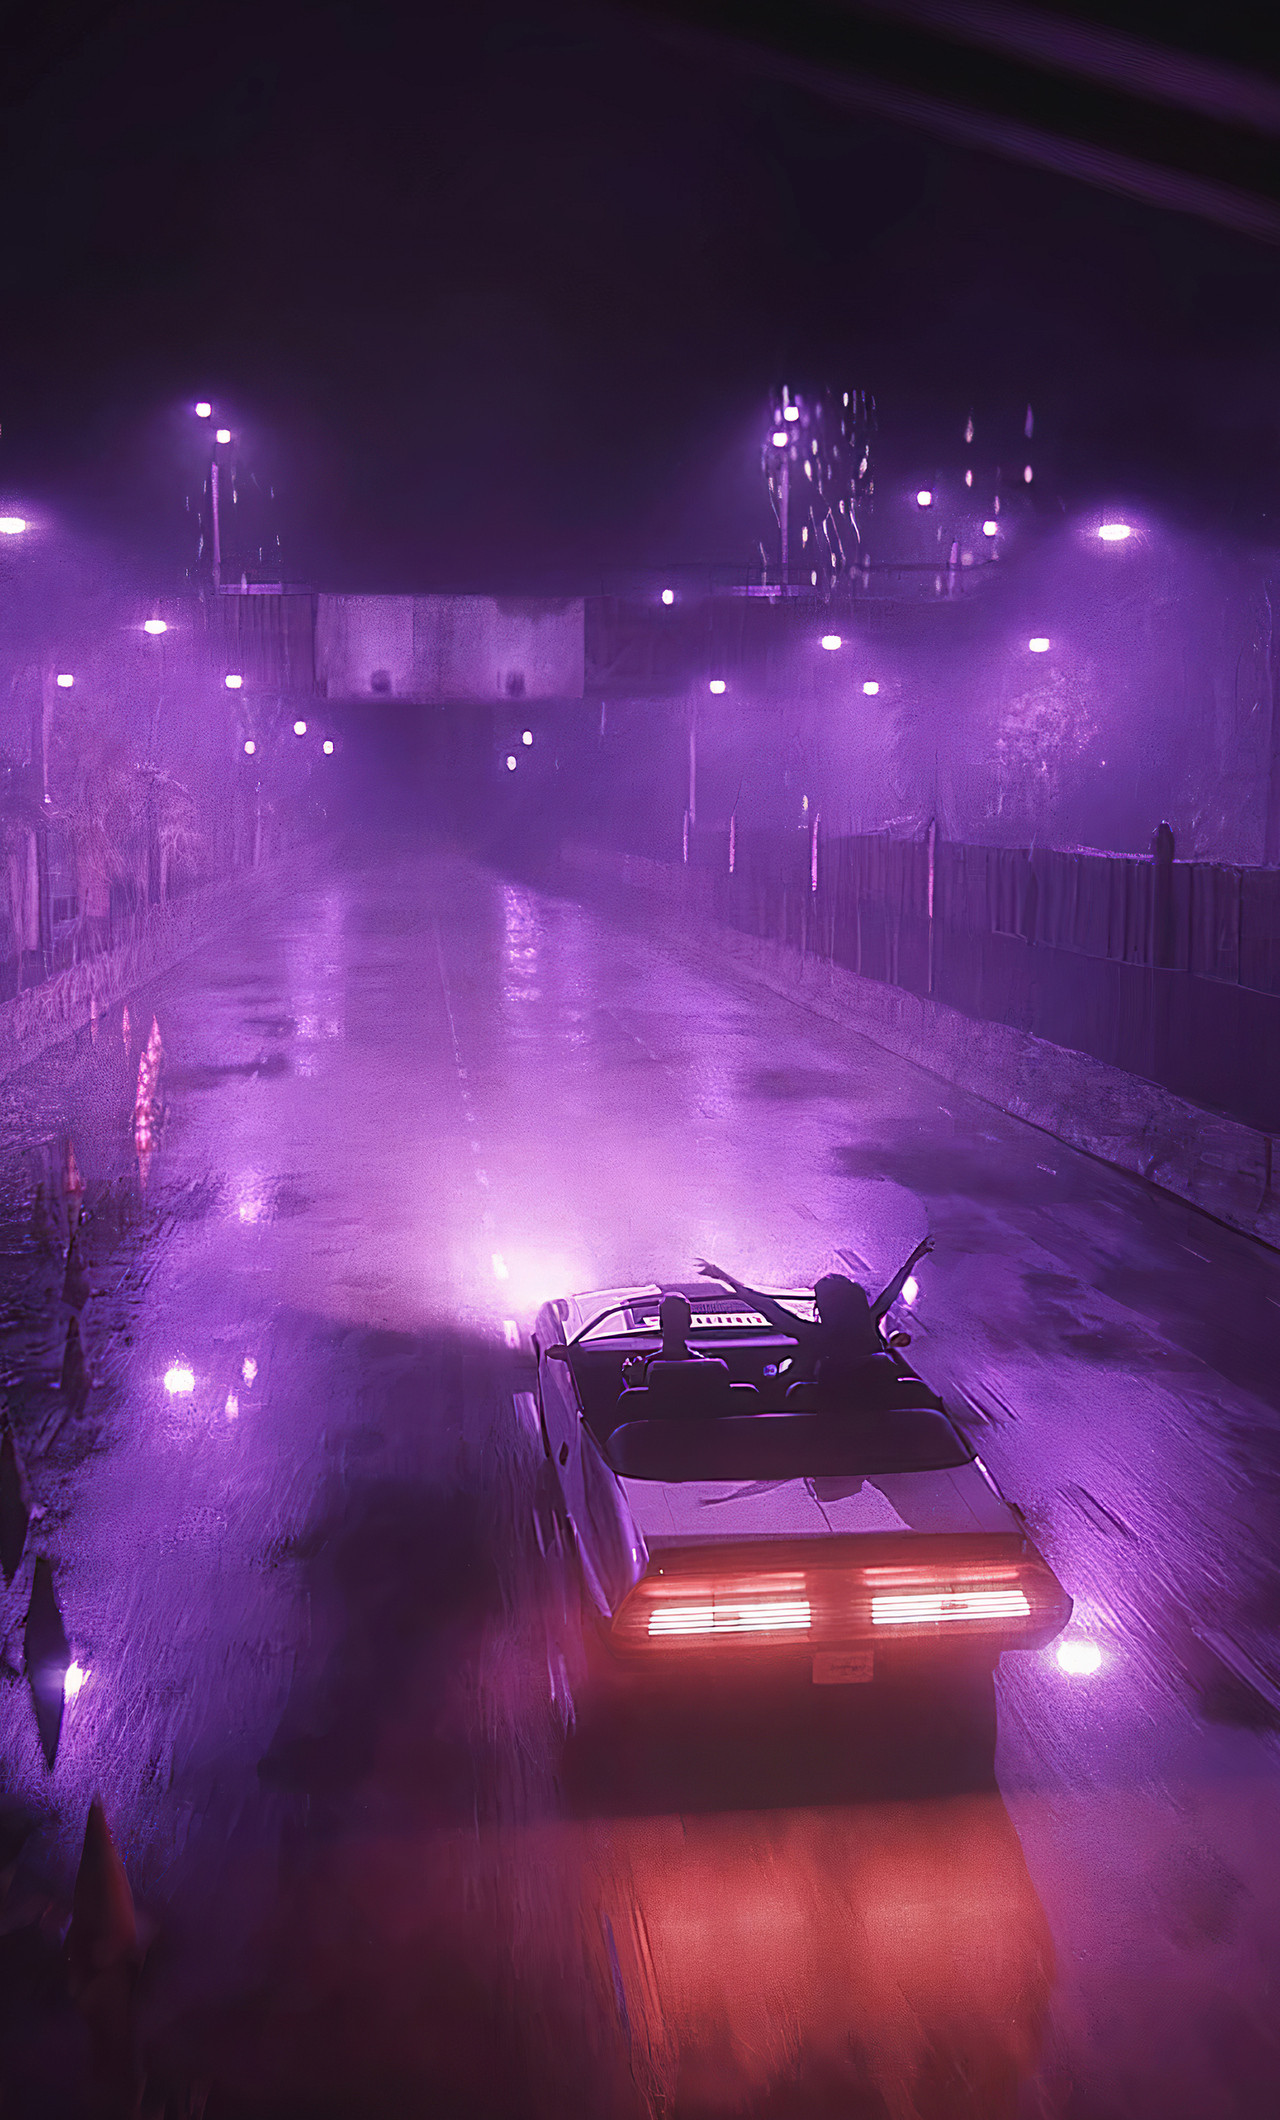 A car with a neon purple light on it drives down a wet road at night. - Night